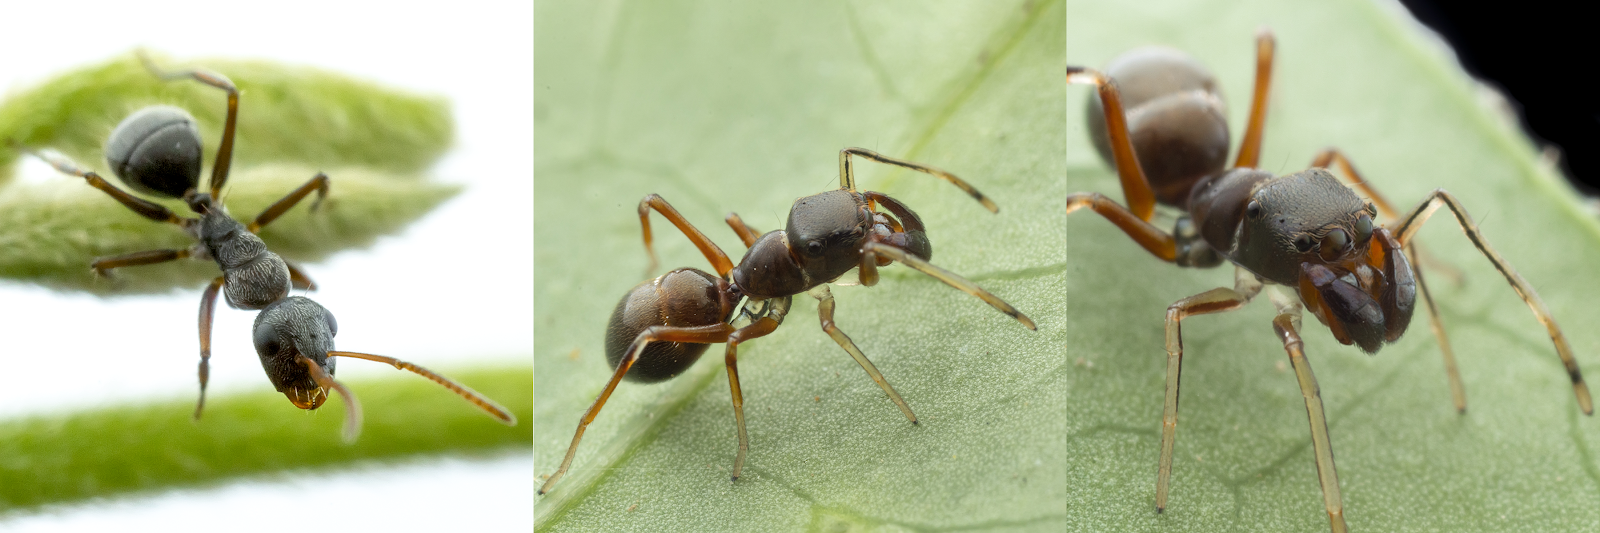 a collage comparison of an ant-mimic jumping spider and the ant it mimics